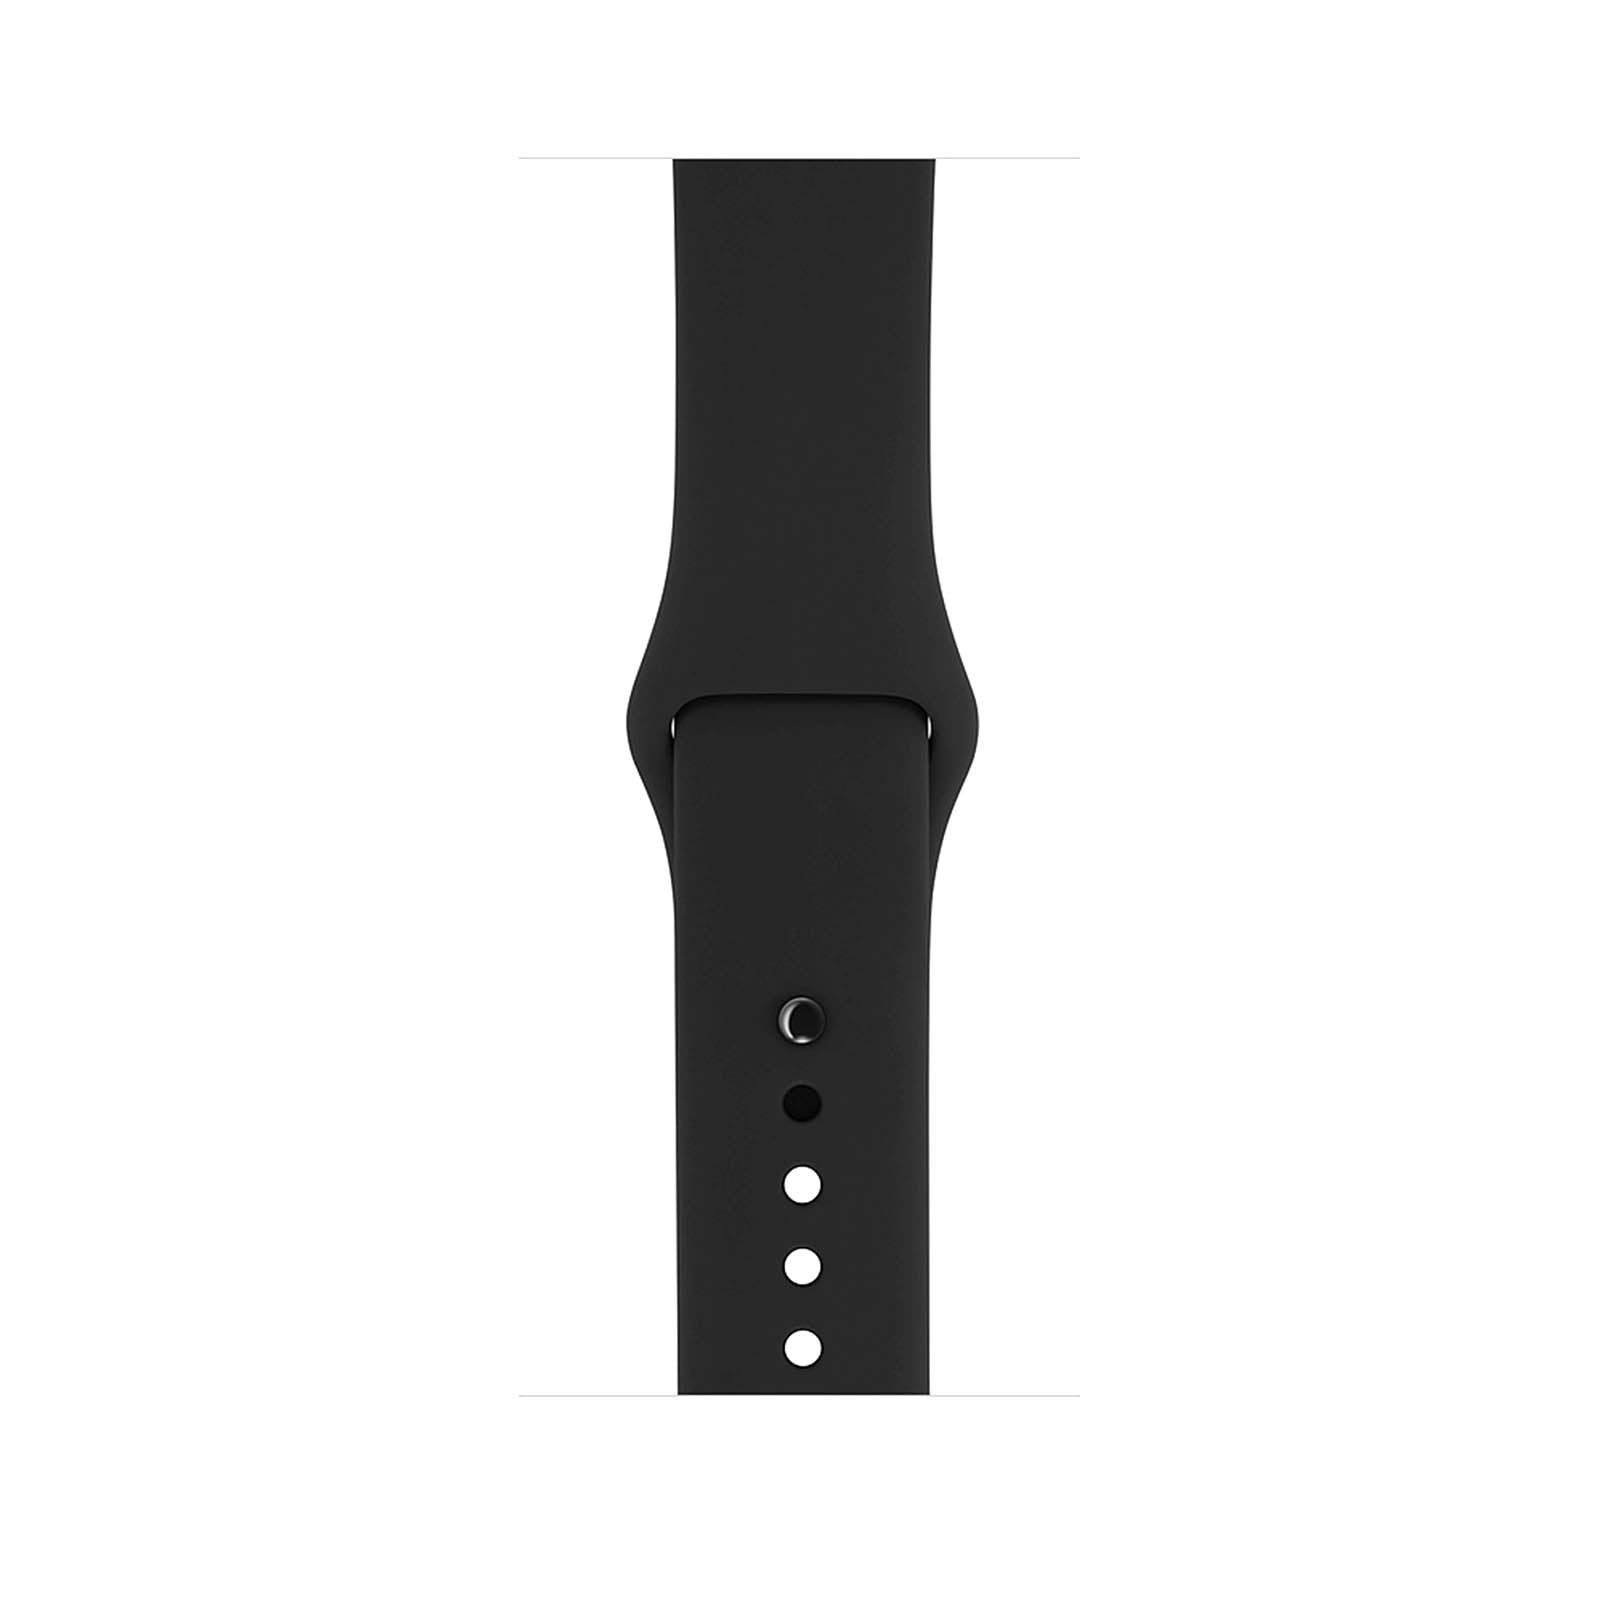 Apple Watch Series 3 Aluminio 38mm GPS Oro Impecable WiFi